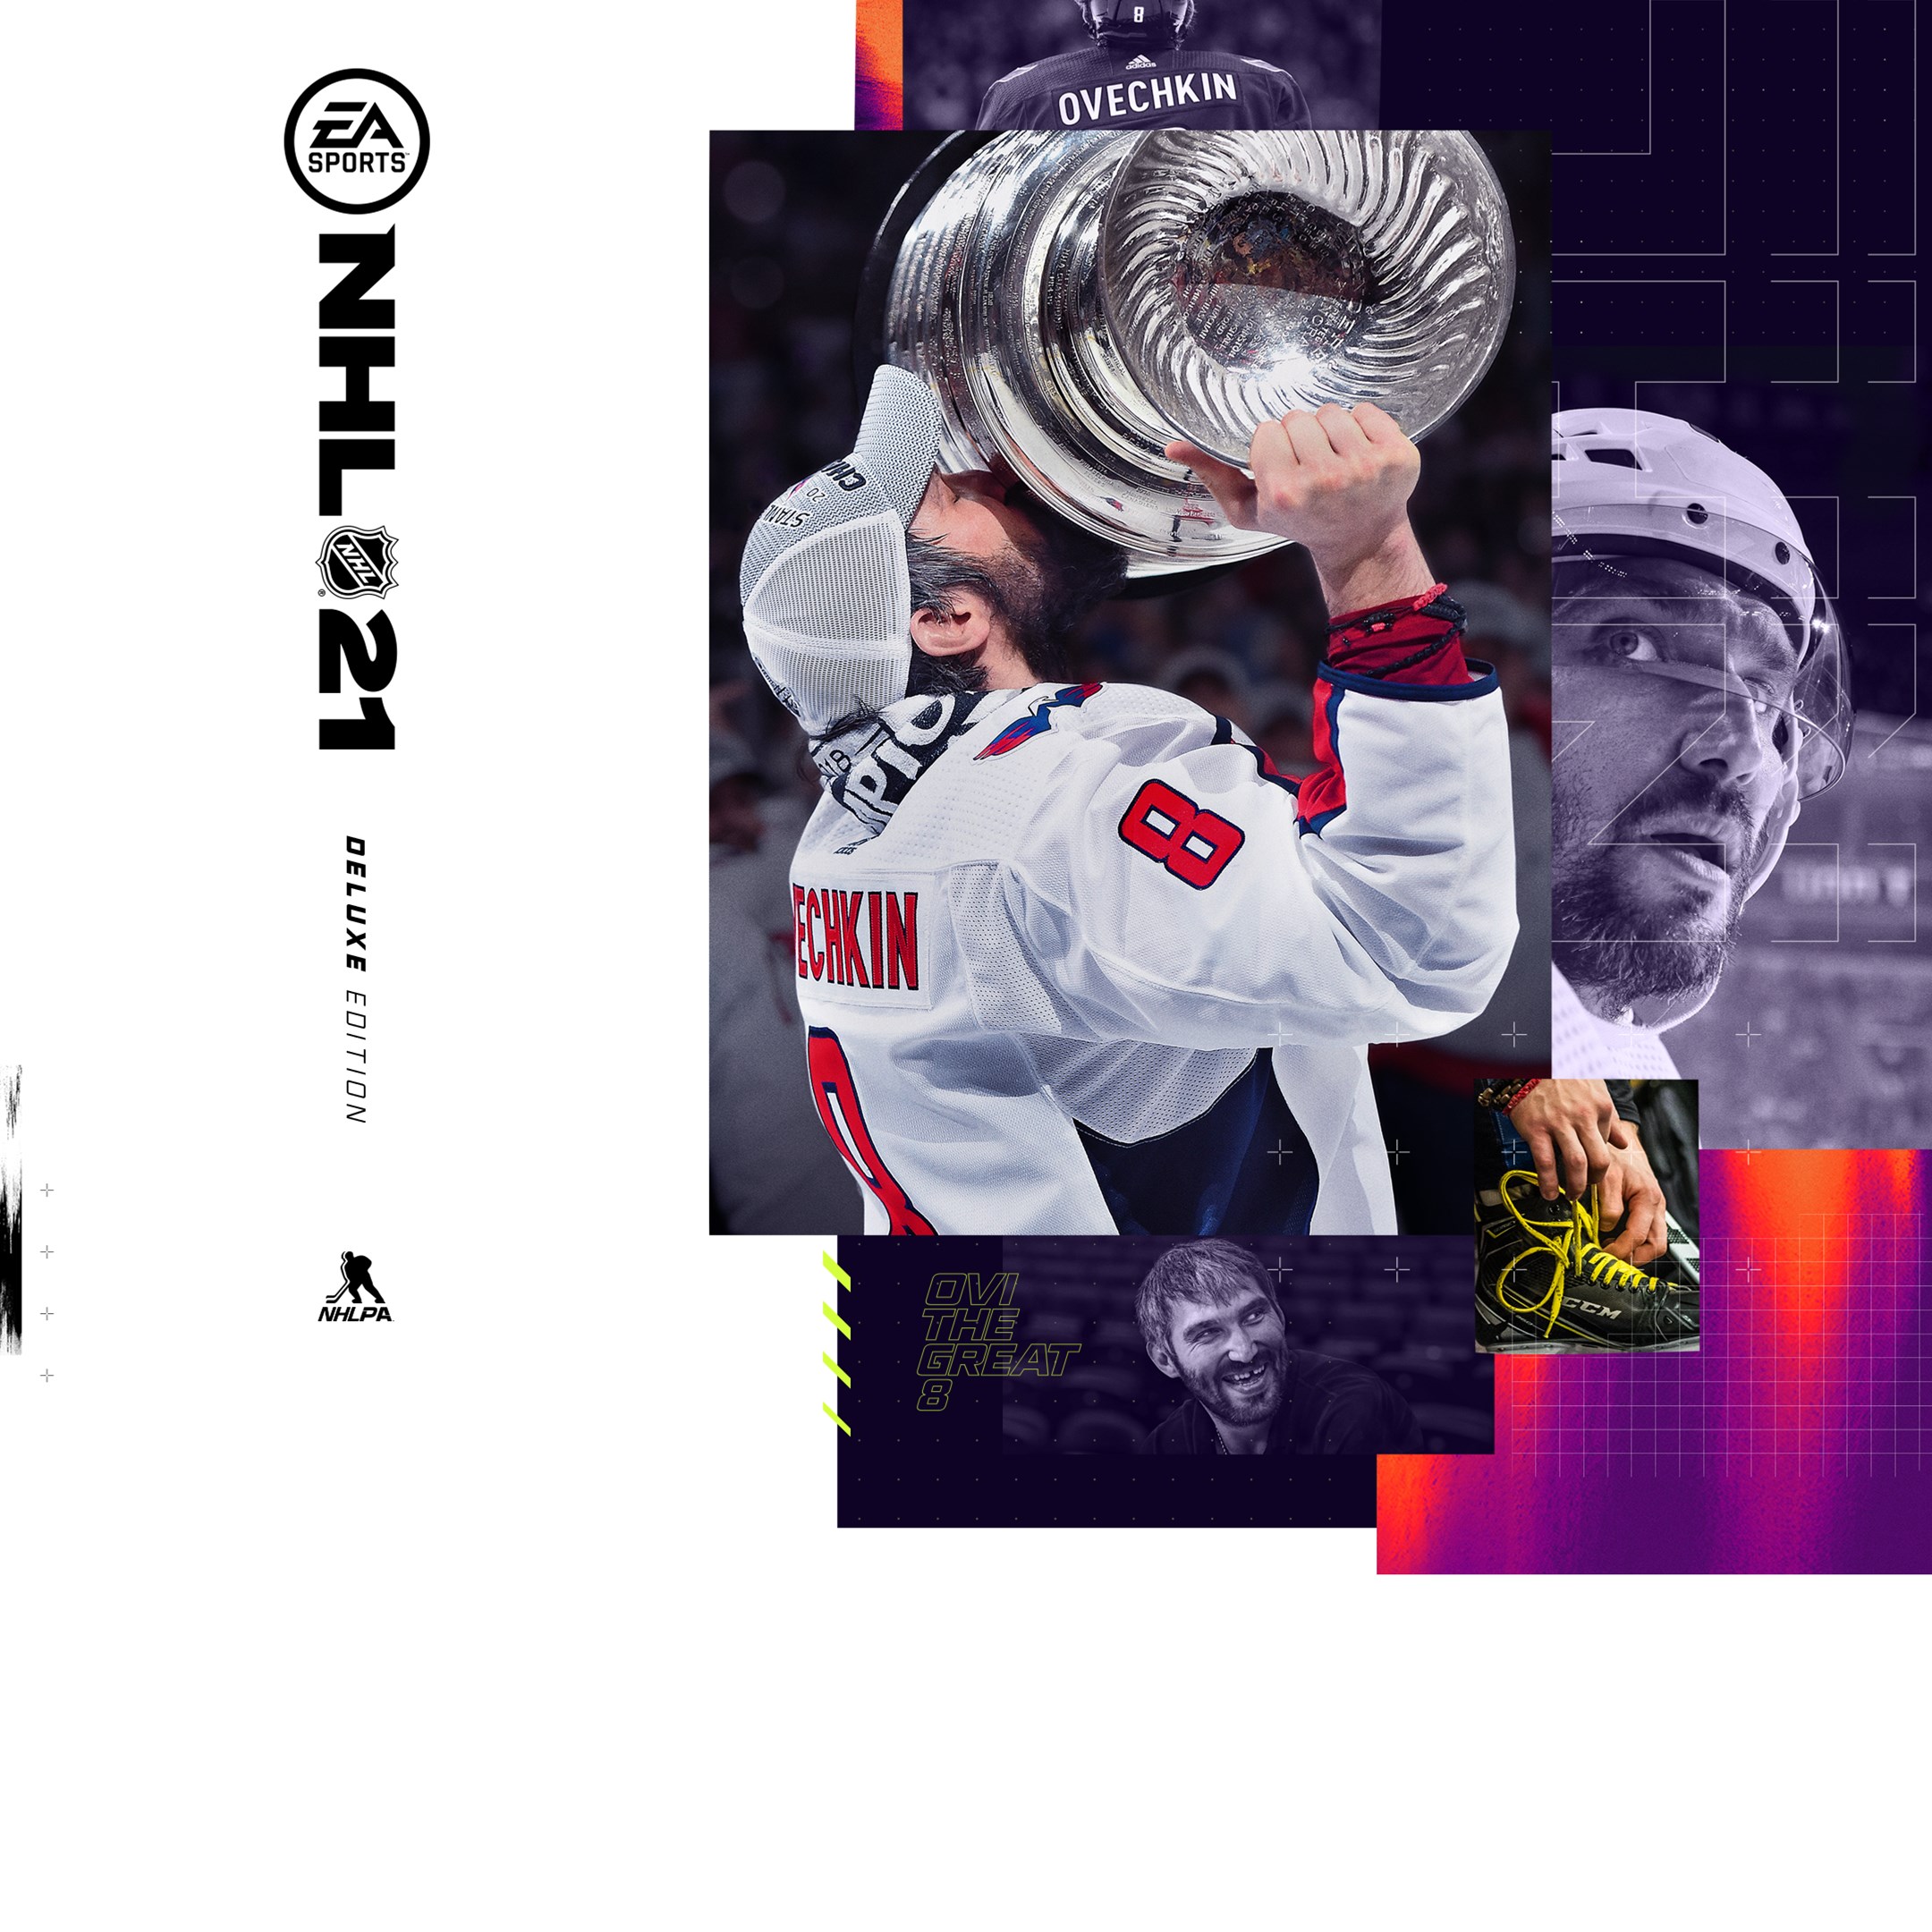 NHL® 21 Deluxe Edition